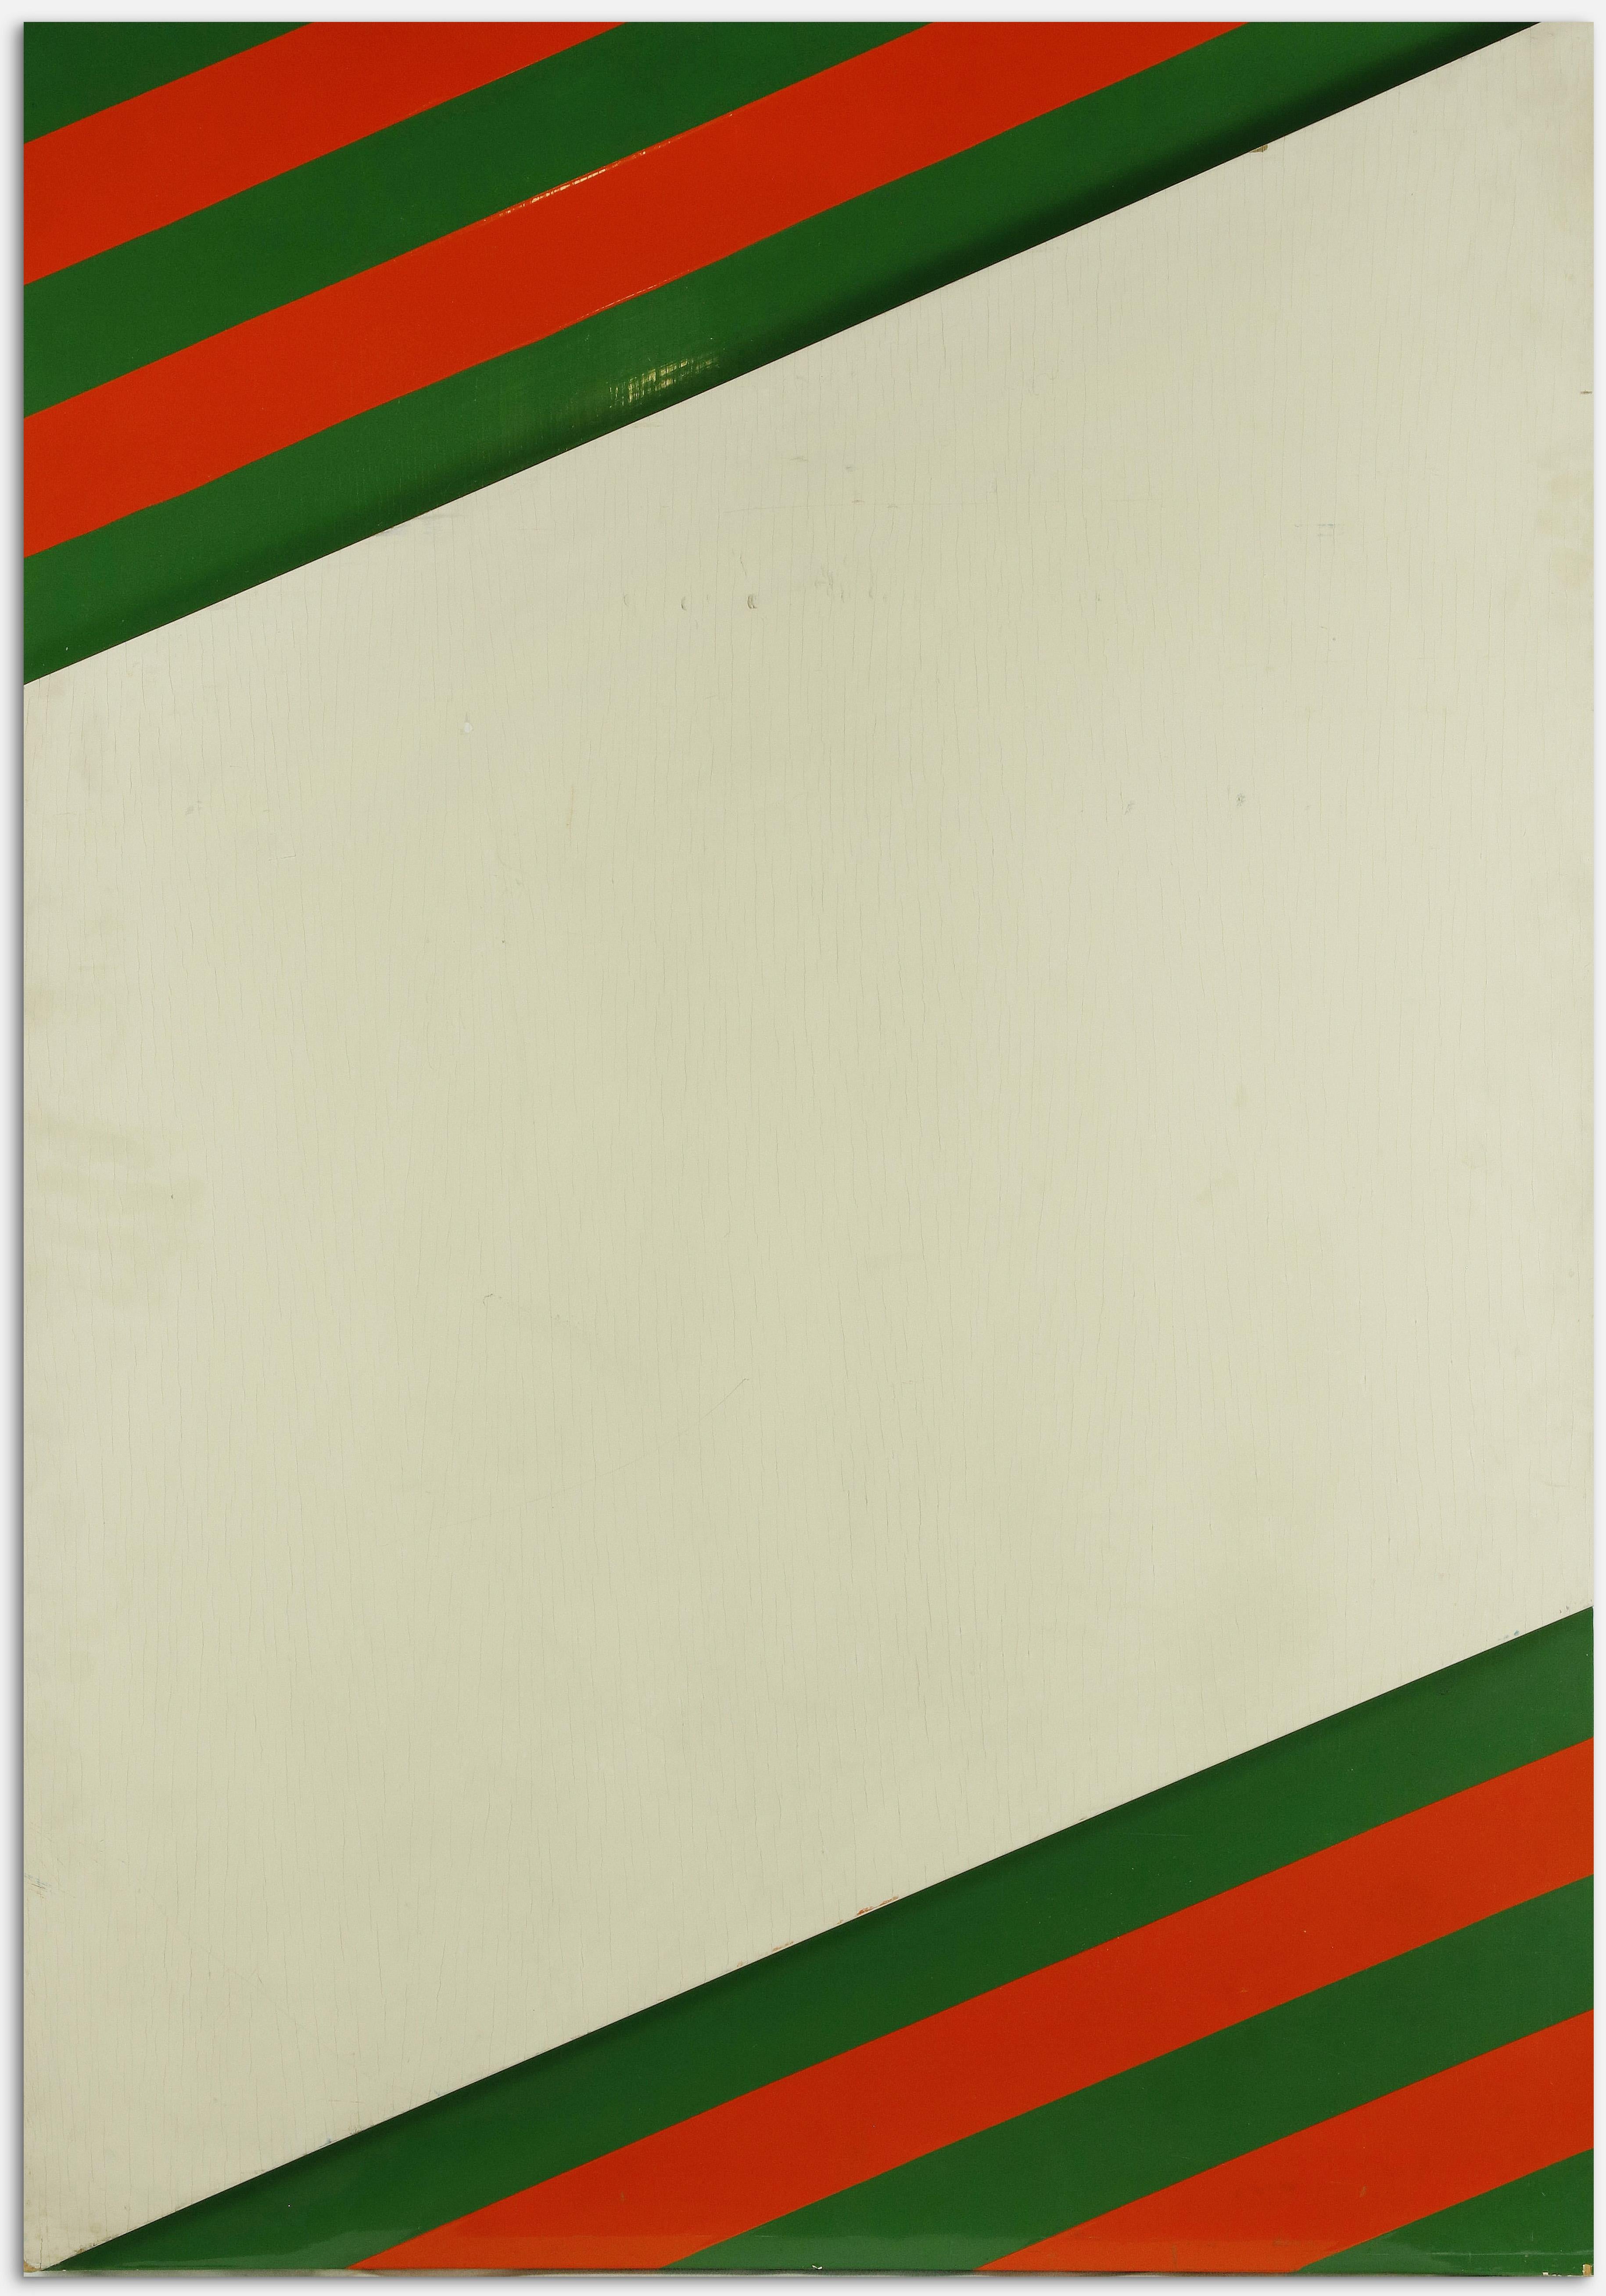 Untitled is a contemporary artwork realized by Renato Livi in 1971.

Mixed colored enamel on board.

